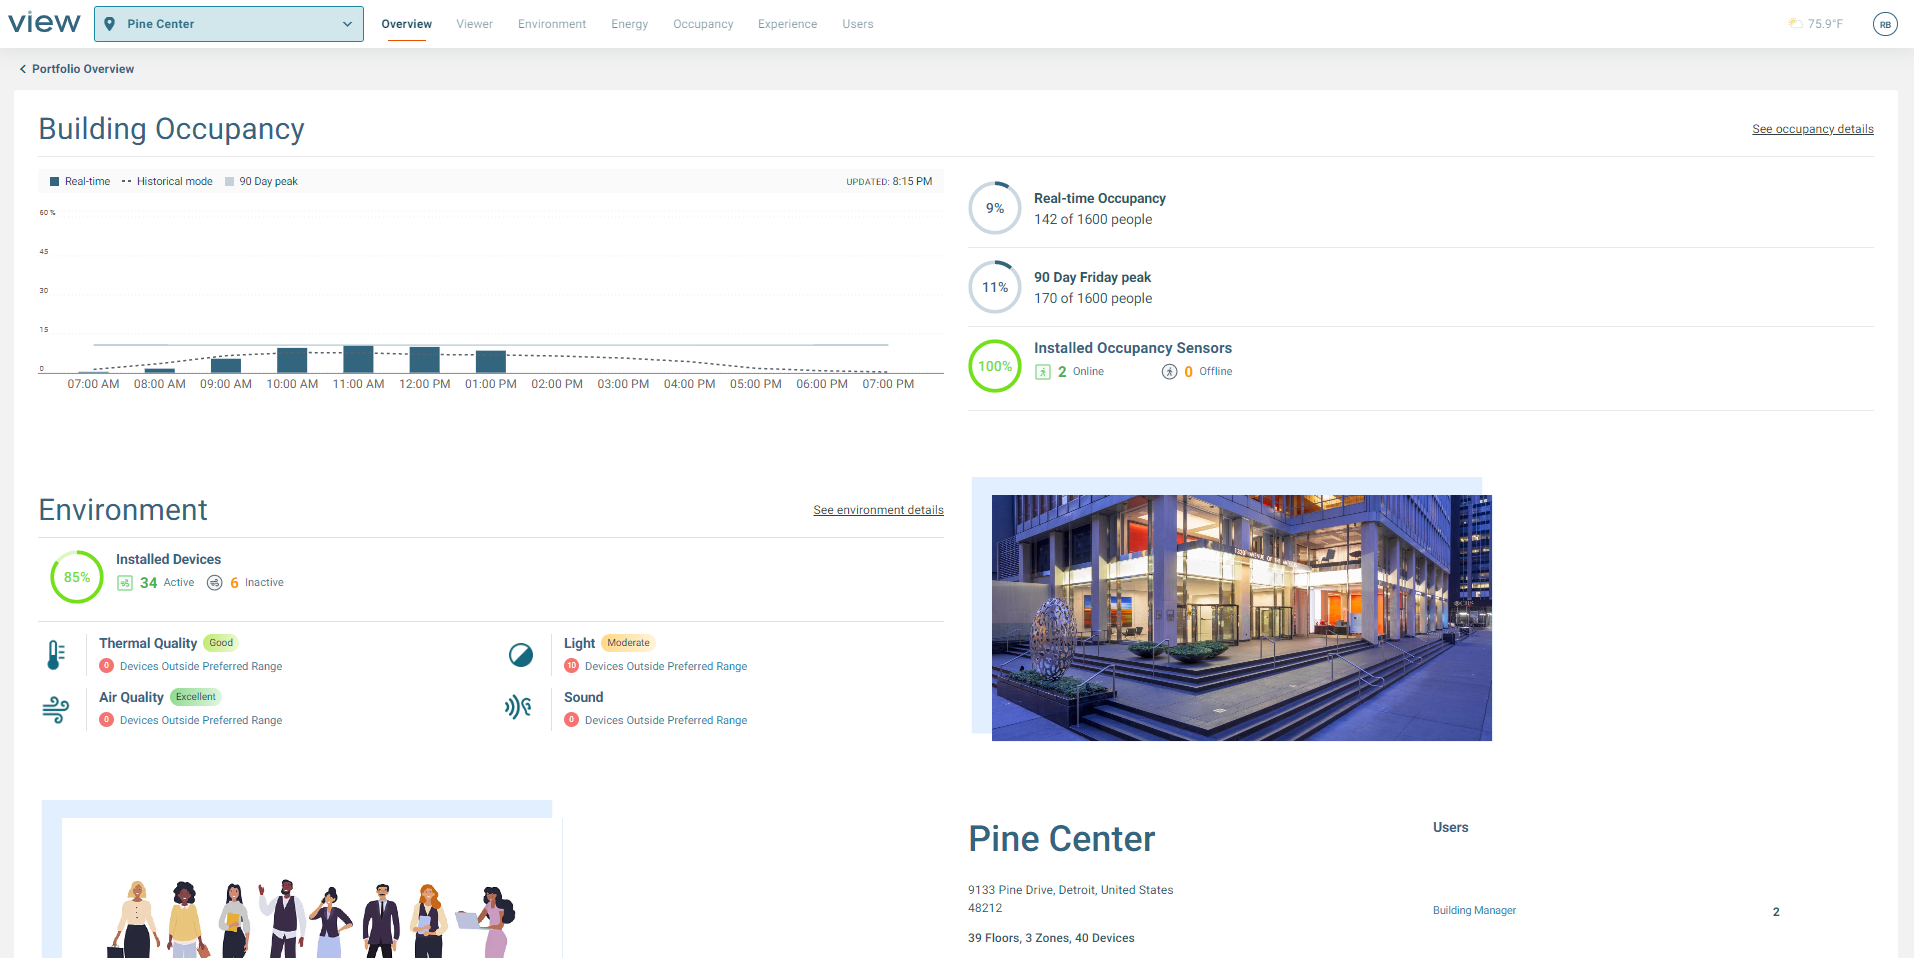 The Building Overview page, which includes different widgets for Occupancy, Environment, and Users. It includes soe high-level data and each section has a link to take you to more details